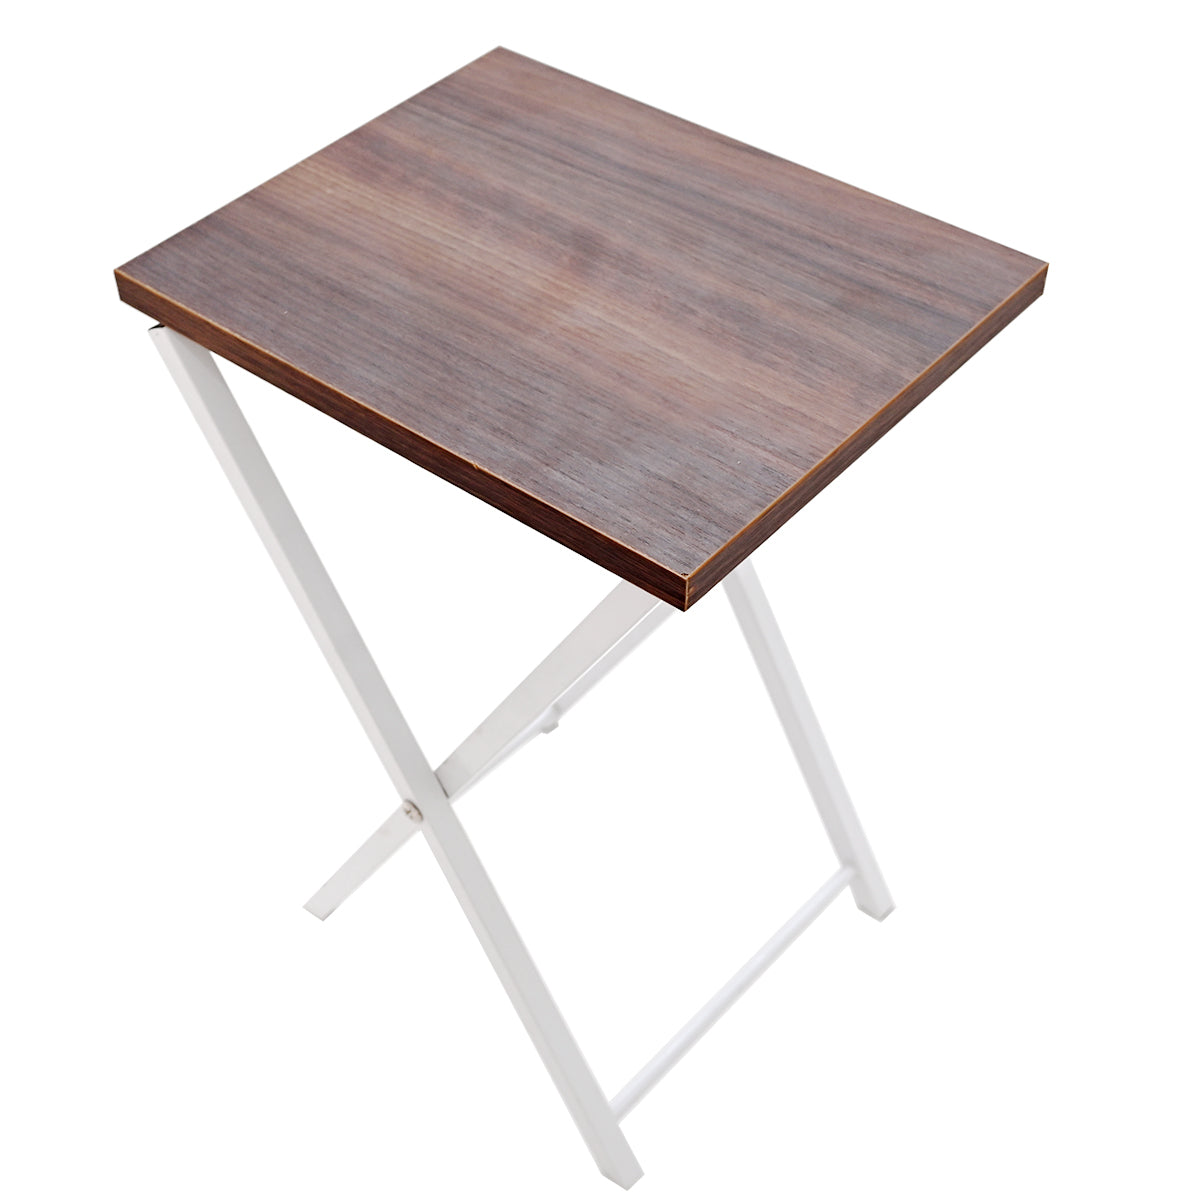 Ditmas Folding Side Table White